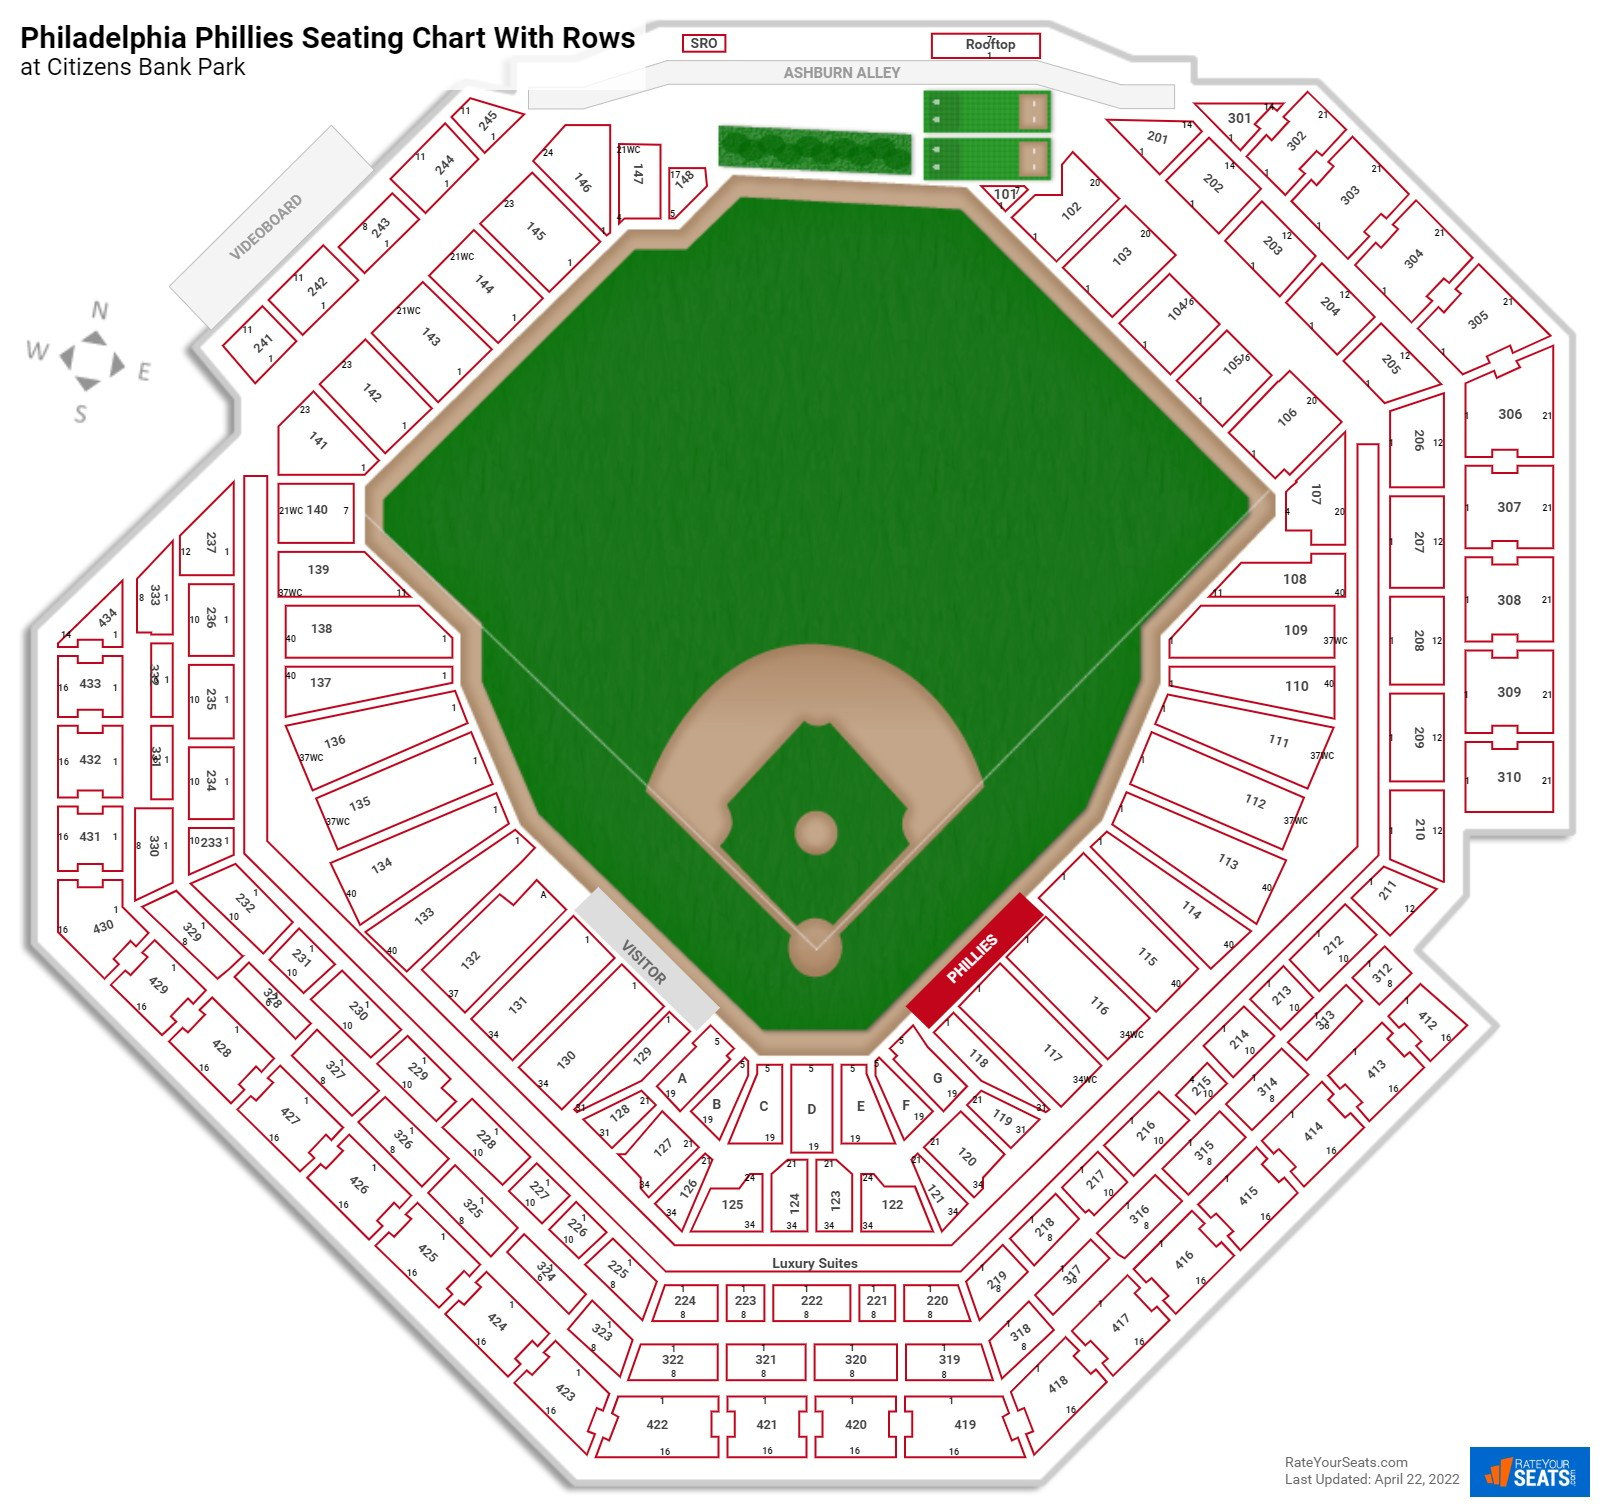 Philadelphia Phillies Seating Charts at Citizens Bank Park